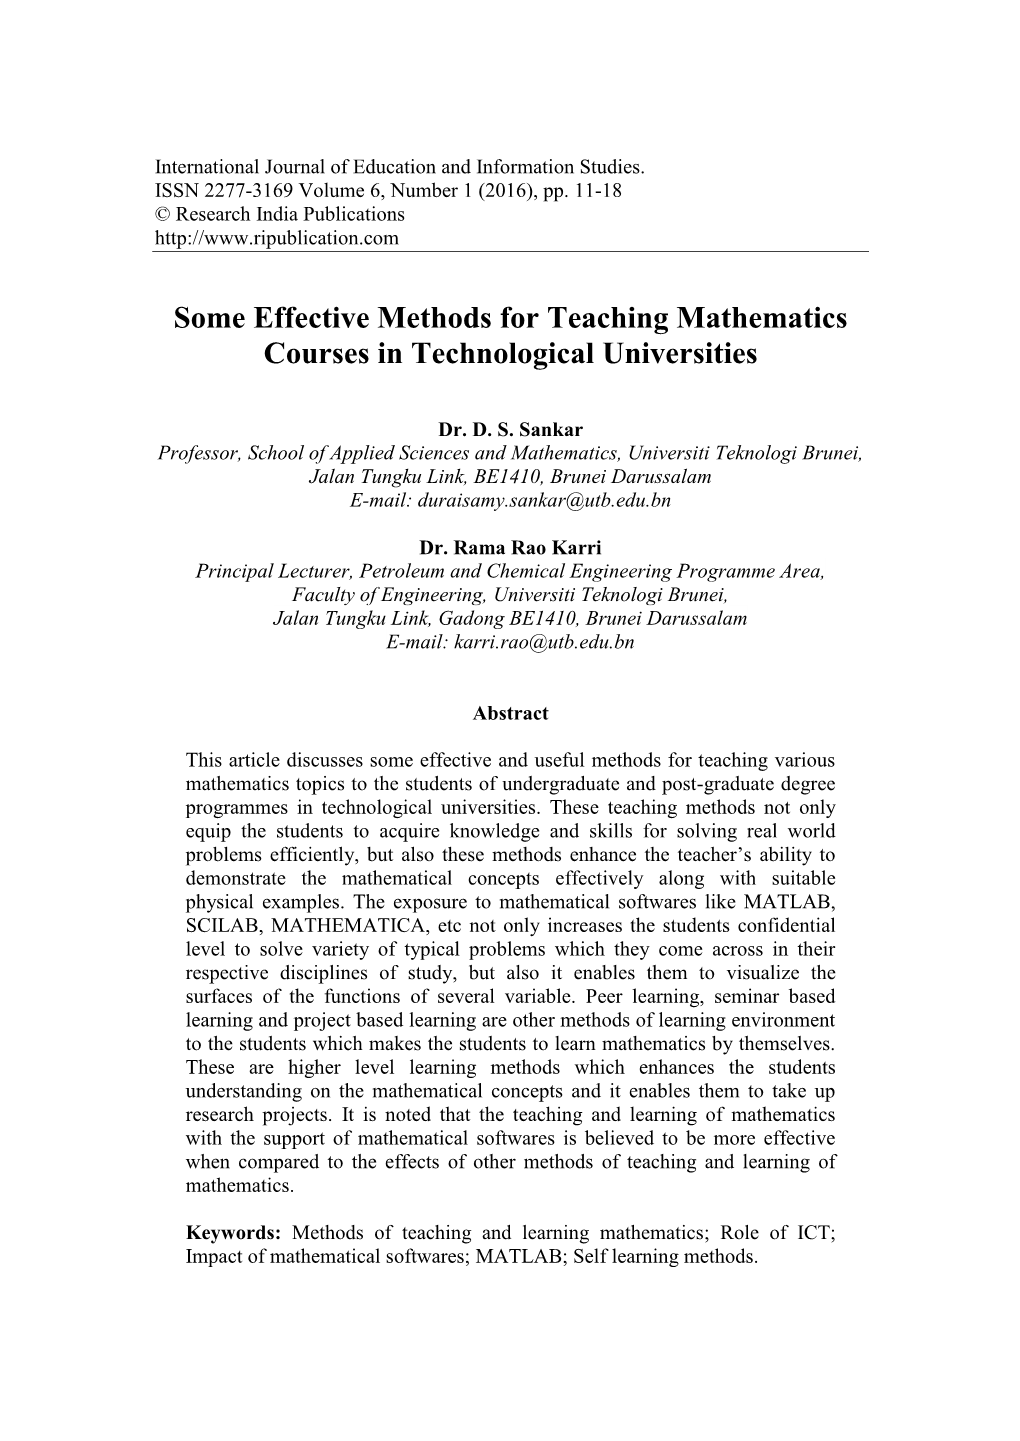 Some Effective Methods for Teaching Mathematics Courses in Technological Universities